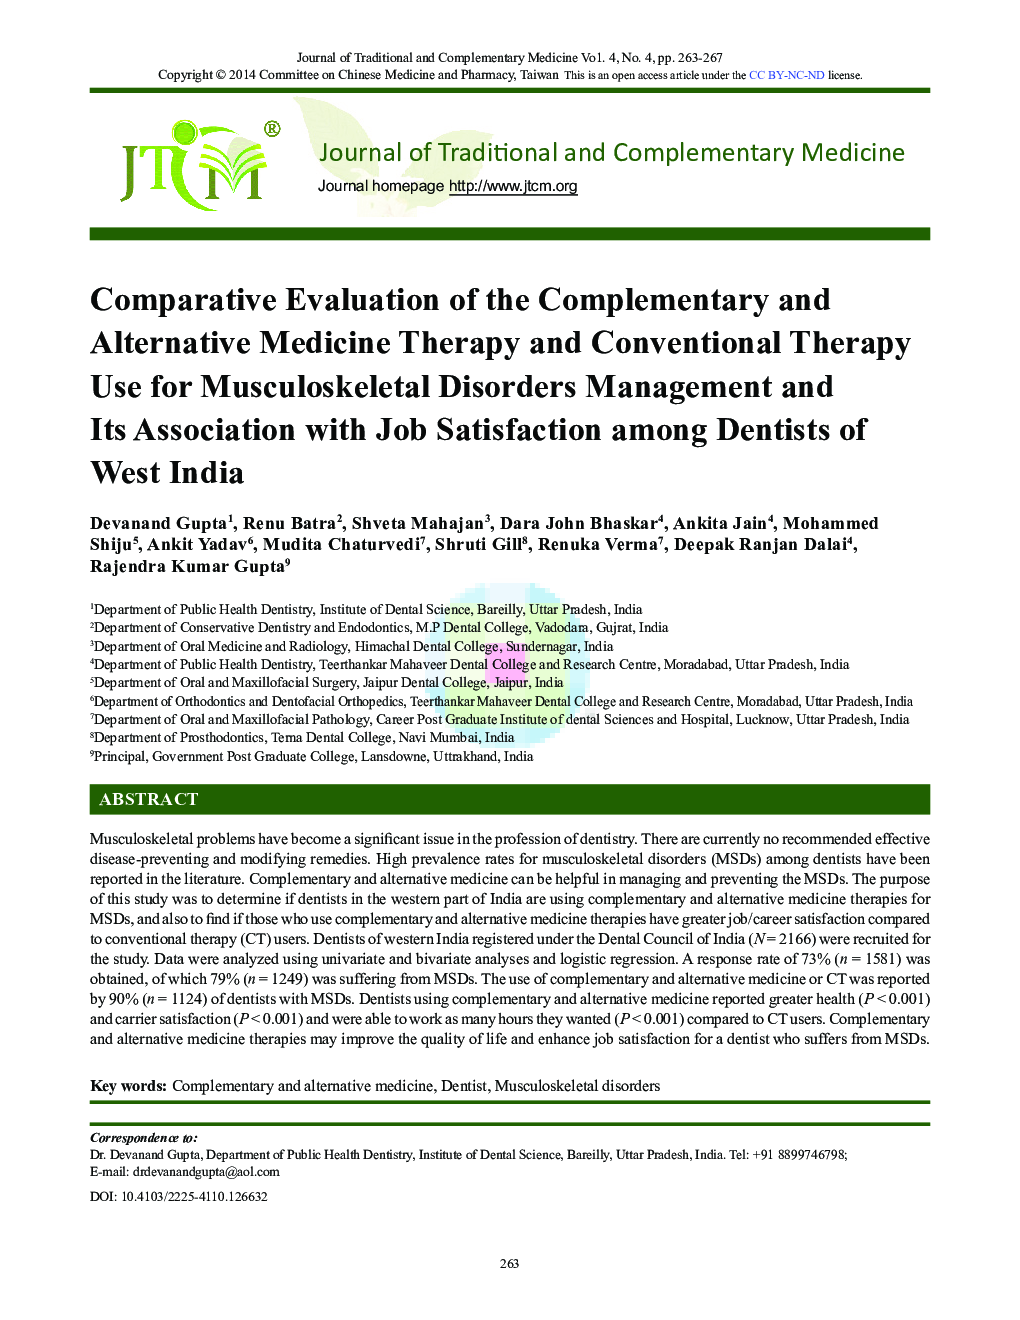 Comparative Evaluation of the Complementary and Alternative Medicine Therapy and Conventional Therapy Use for Musculoskeletal Disorders Management and Its Association with Job Satisfaction among Dentists of West India